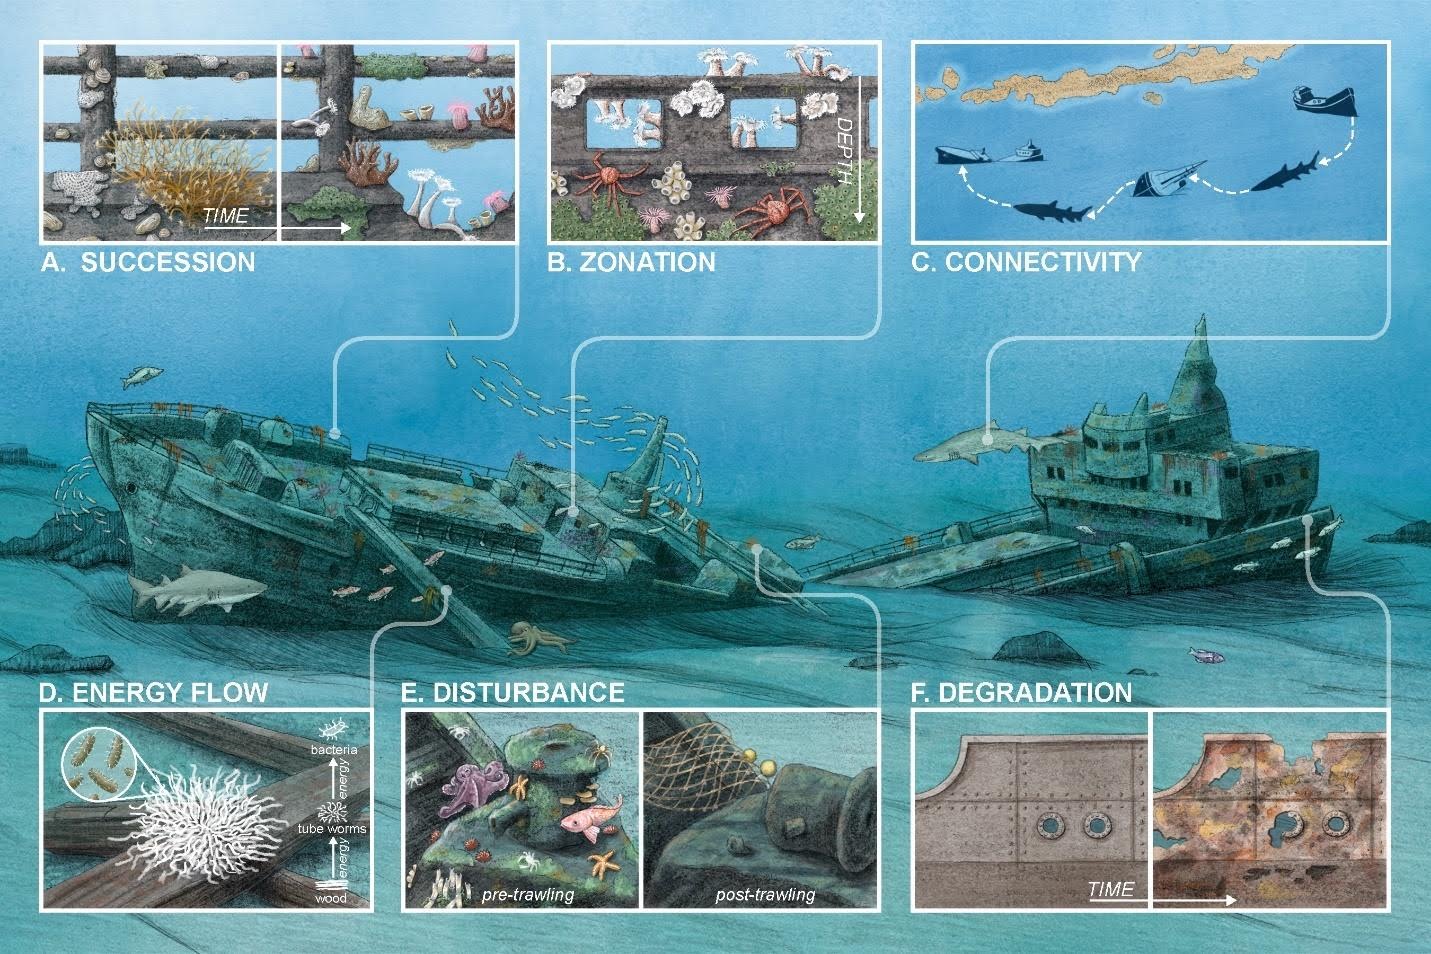 Graphic depicting ecological processes like succession, zonation, connectivity, energy flow, disturbance, and degradation on a shipwreck.